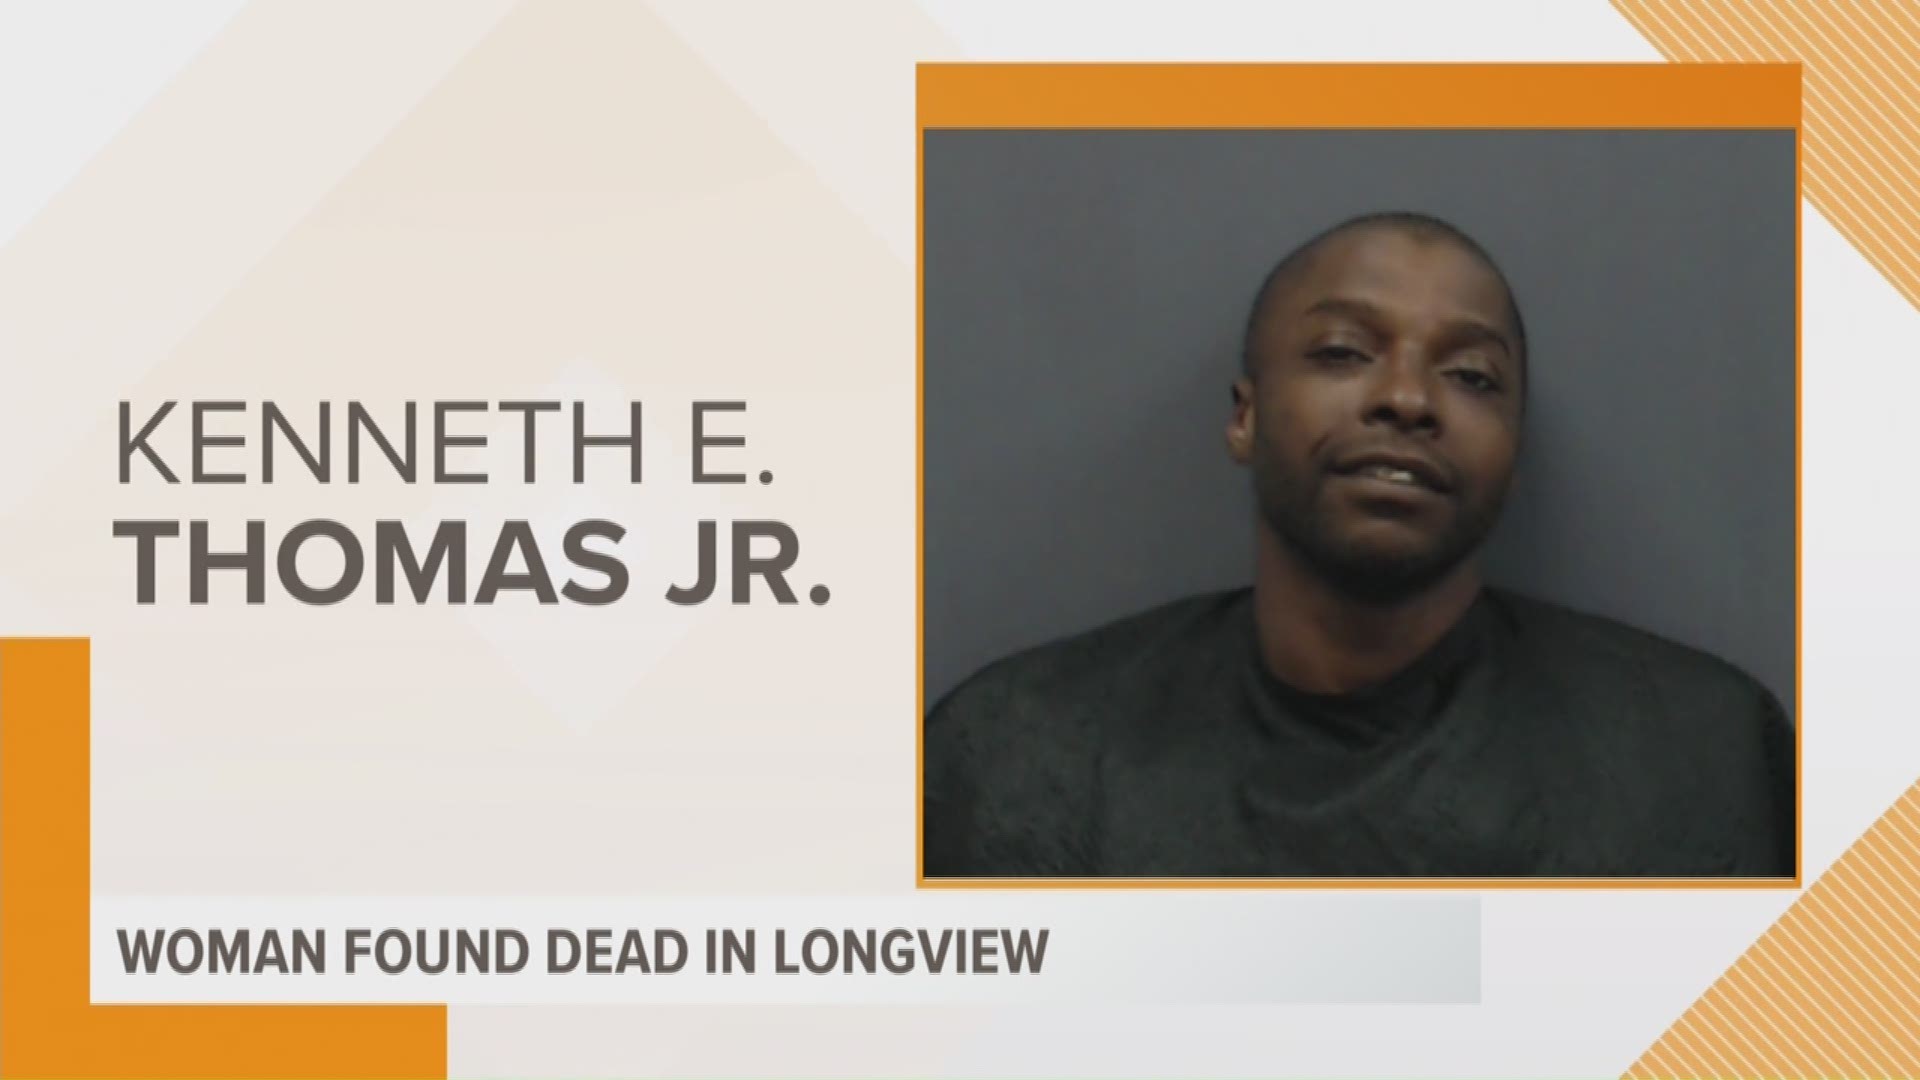 If you have any information regarding the case please call the Longview Police Department at (903) 237-1199 or Crime Stoppers at (903) 236-7867.